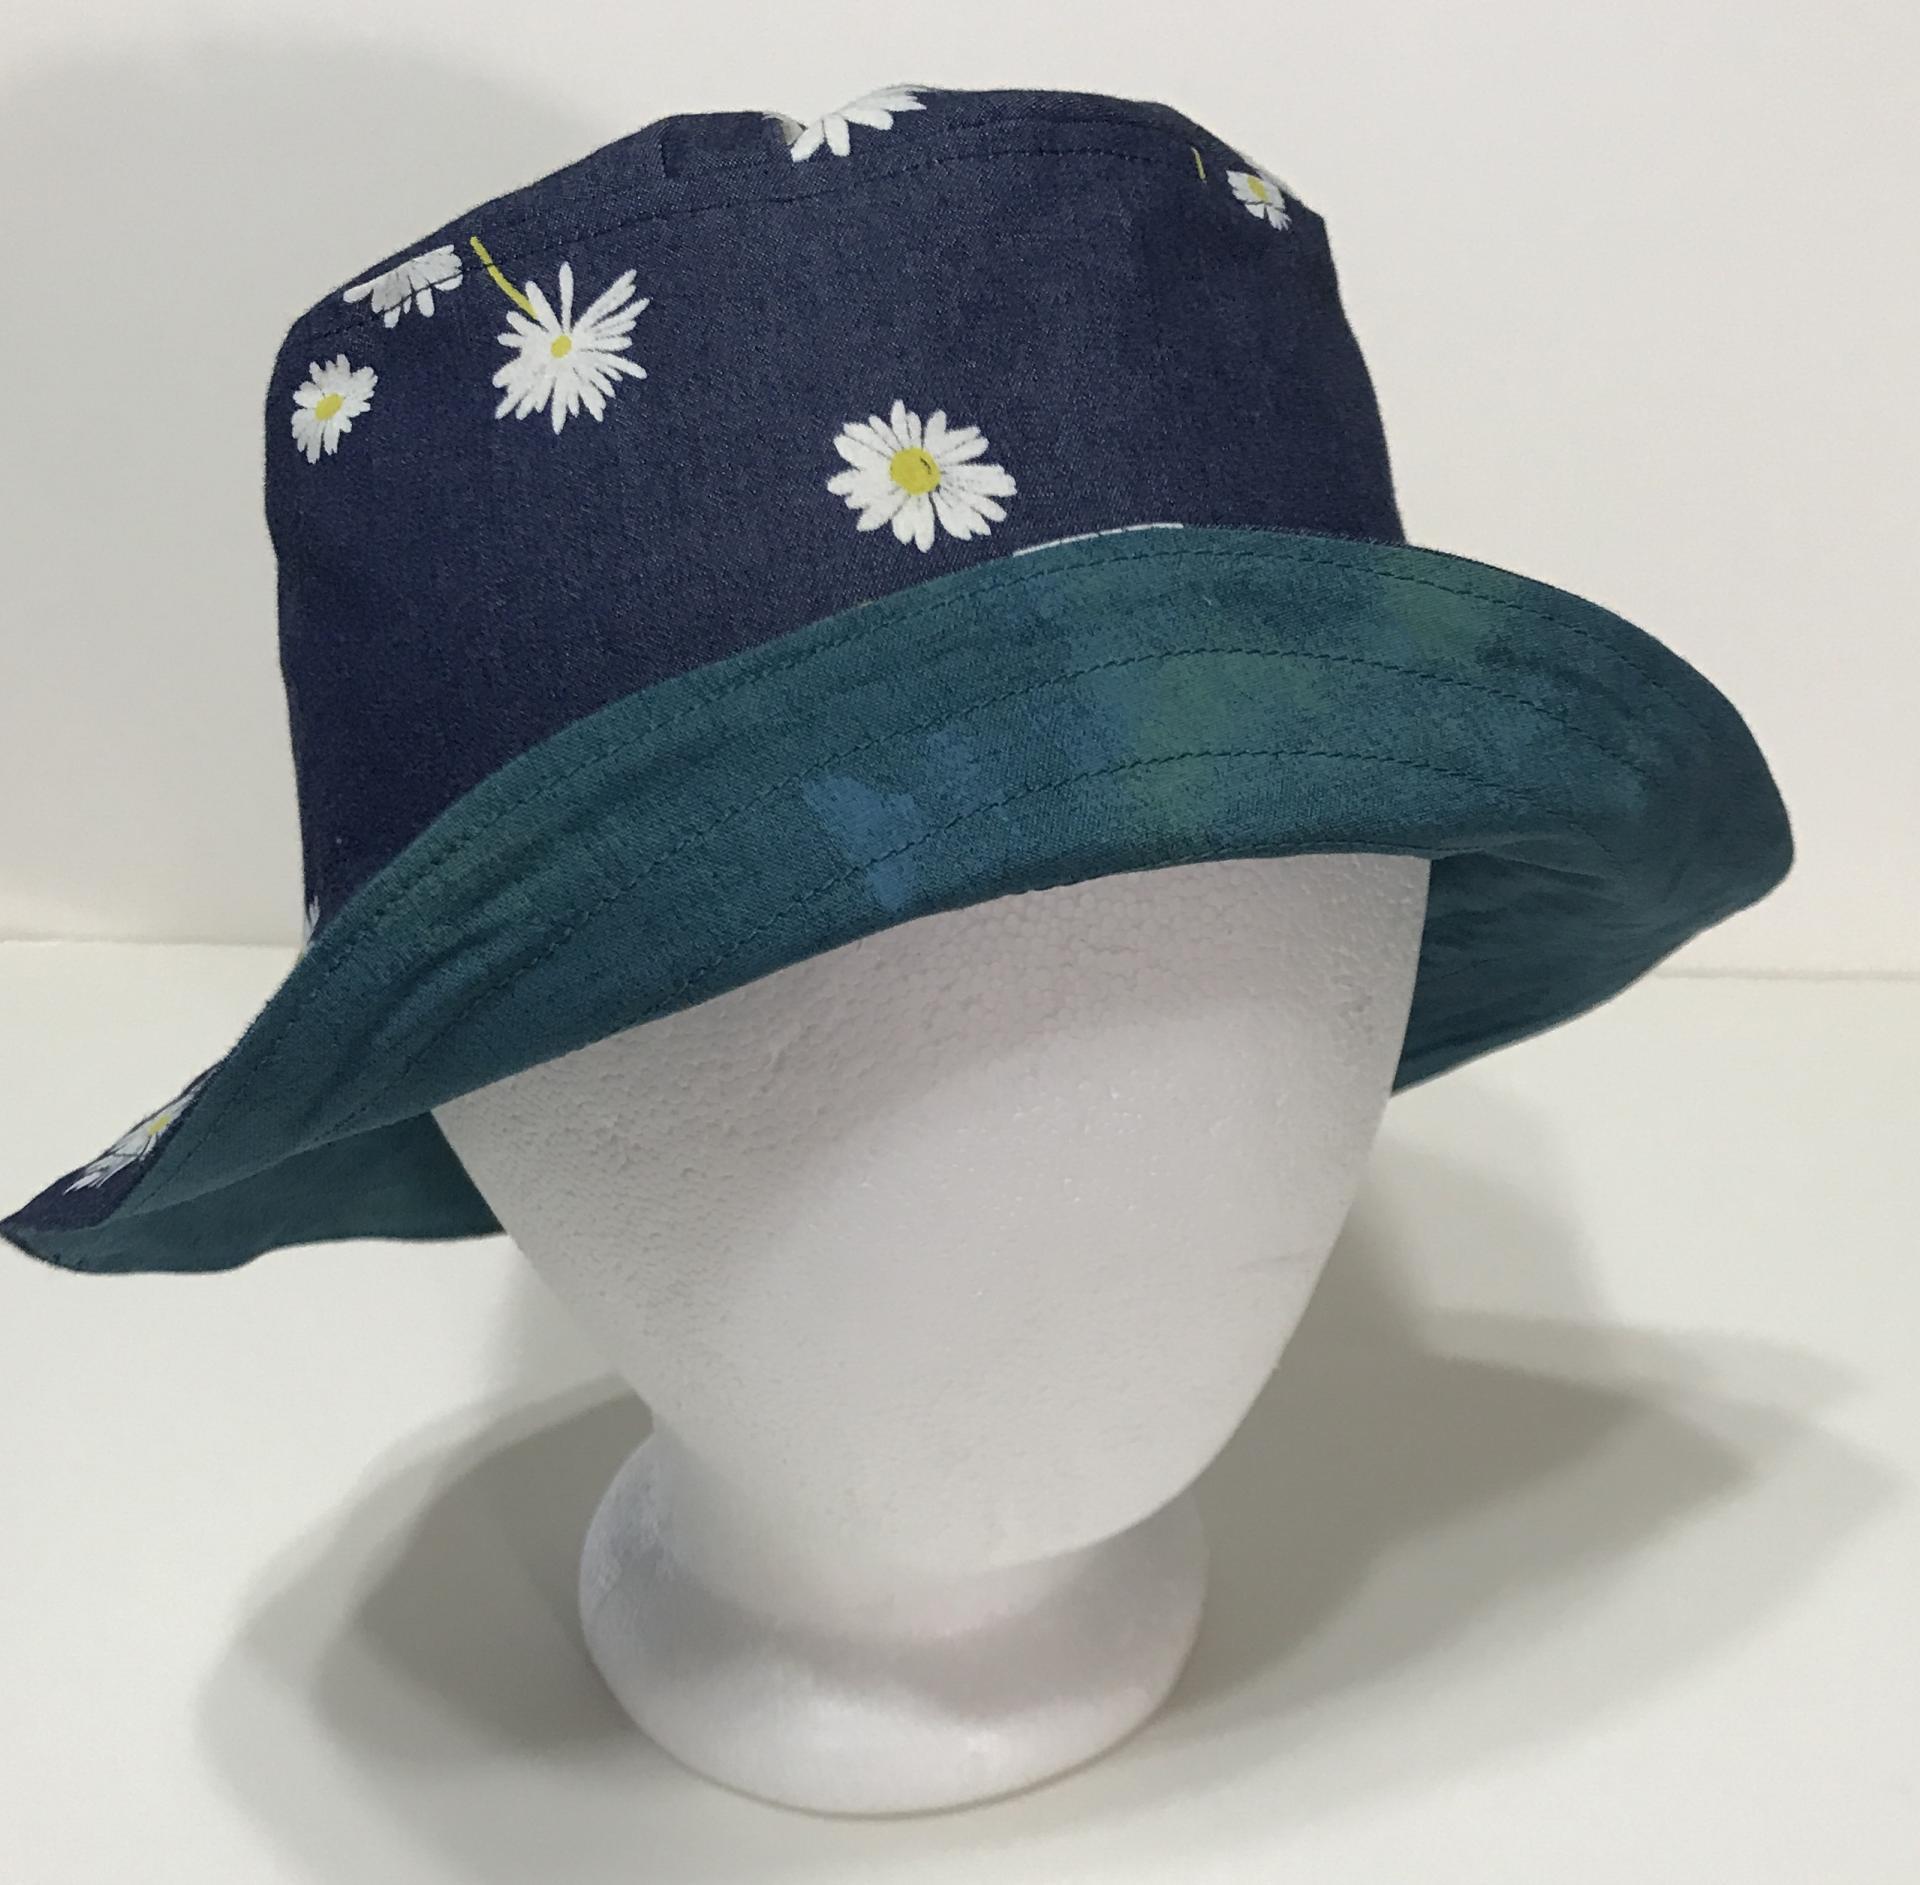 Front view with brim upturned